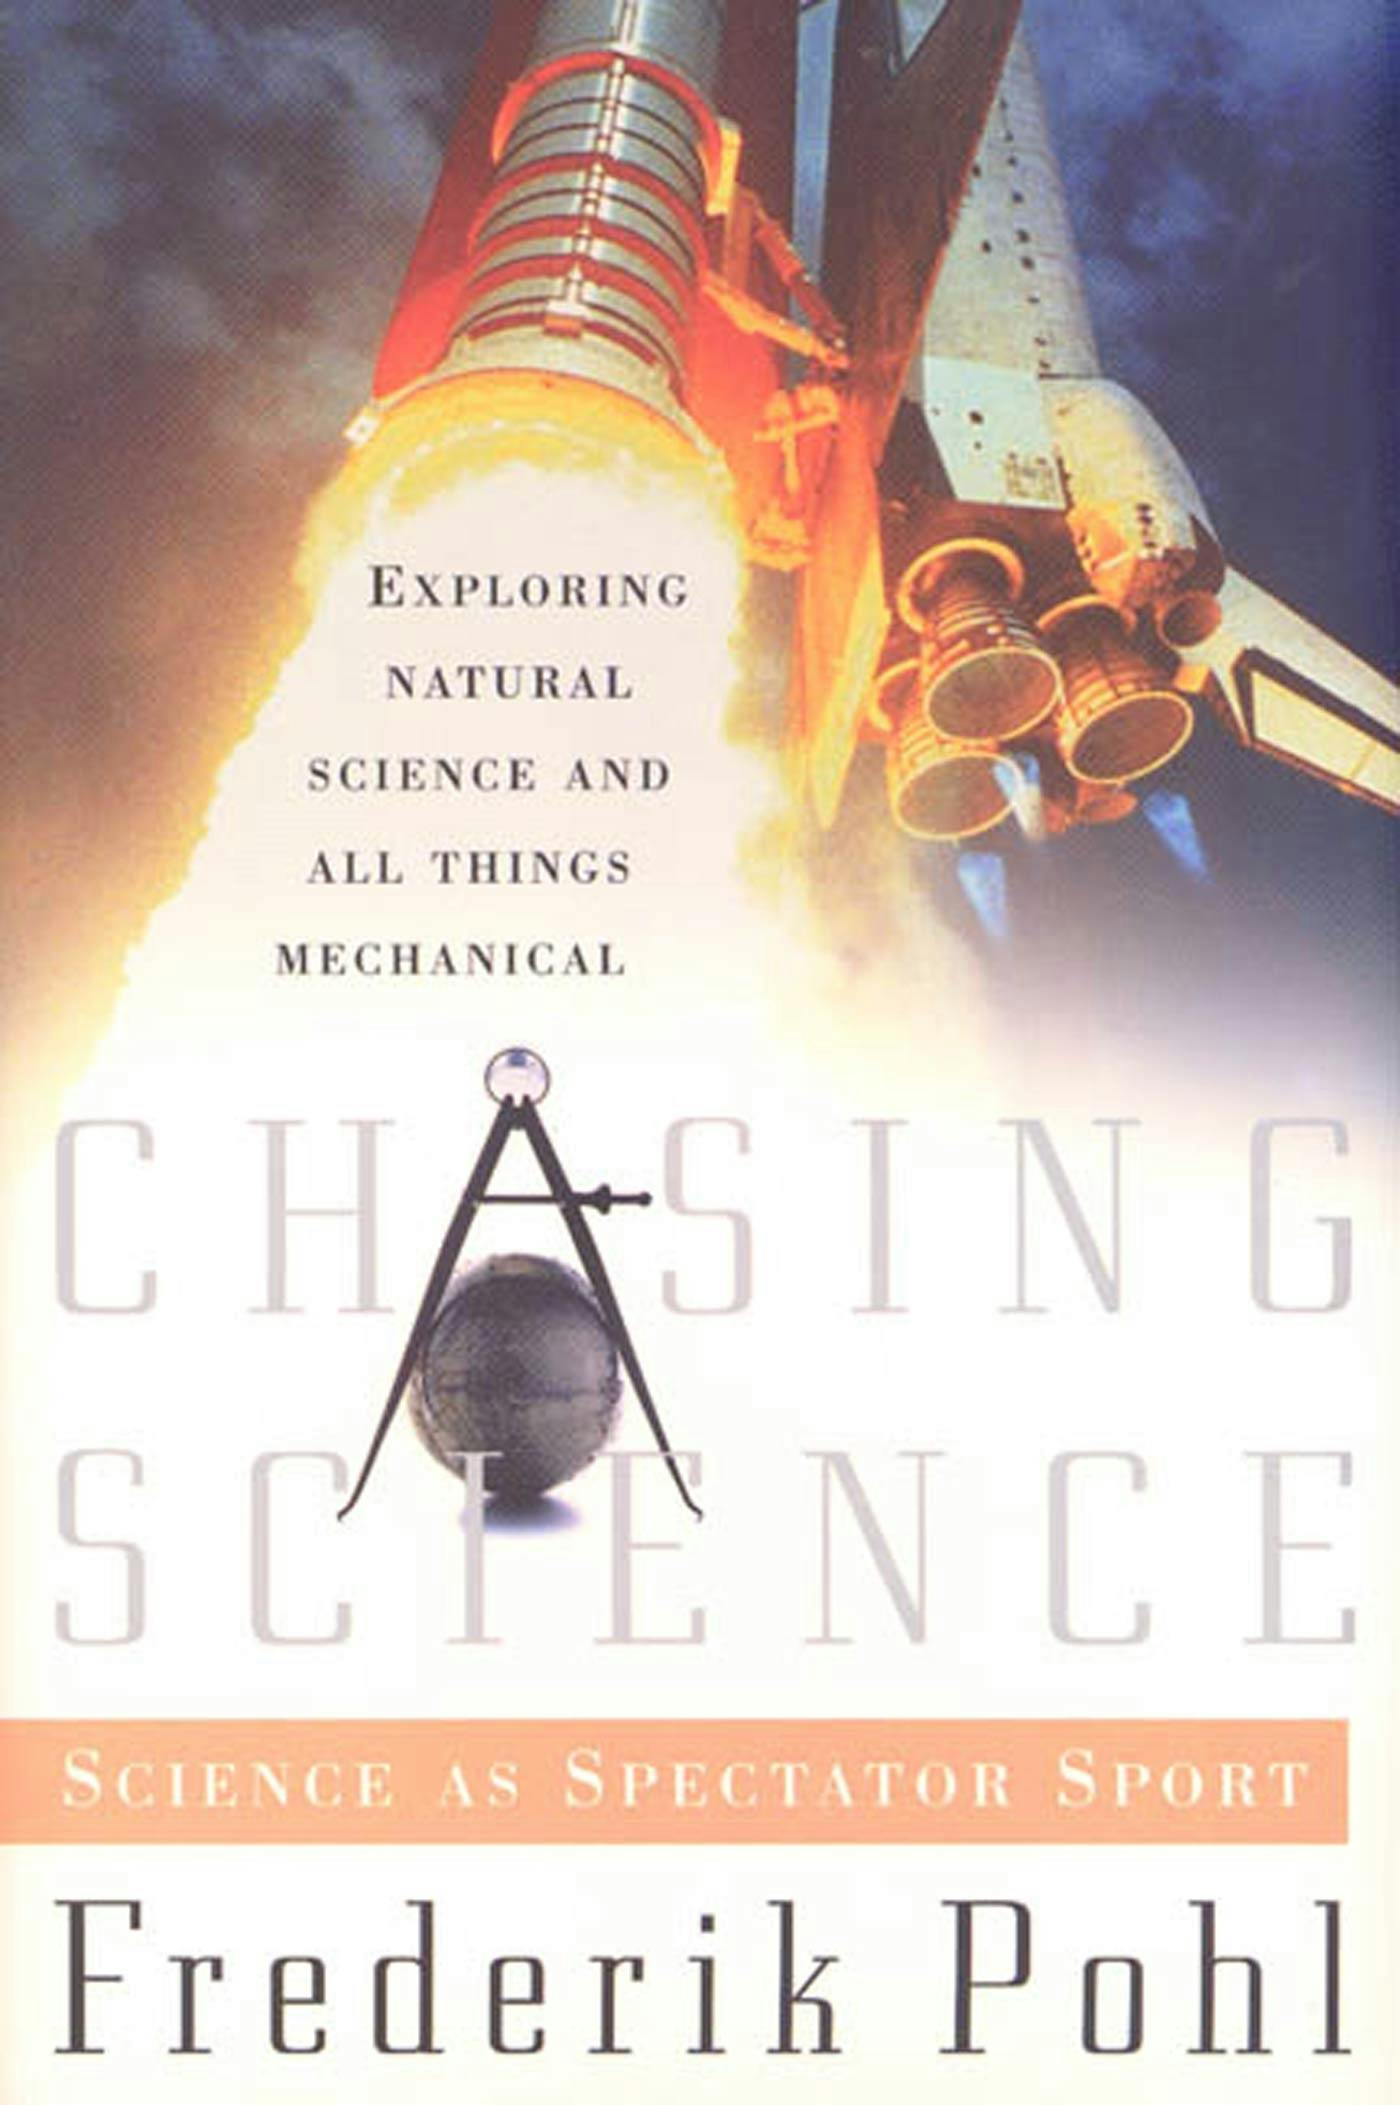 Cover for the book titled as: Chasing Science